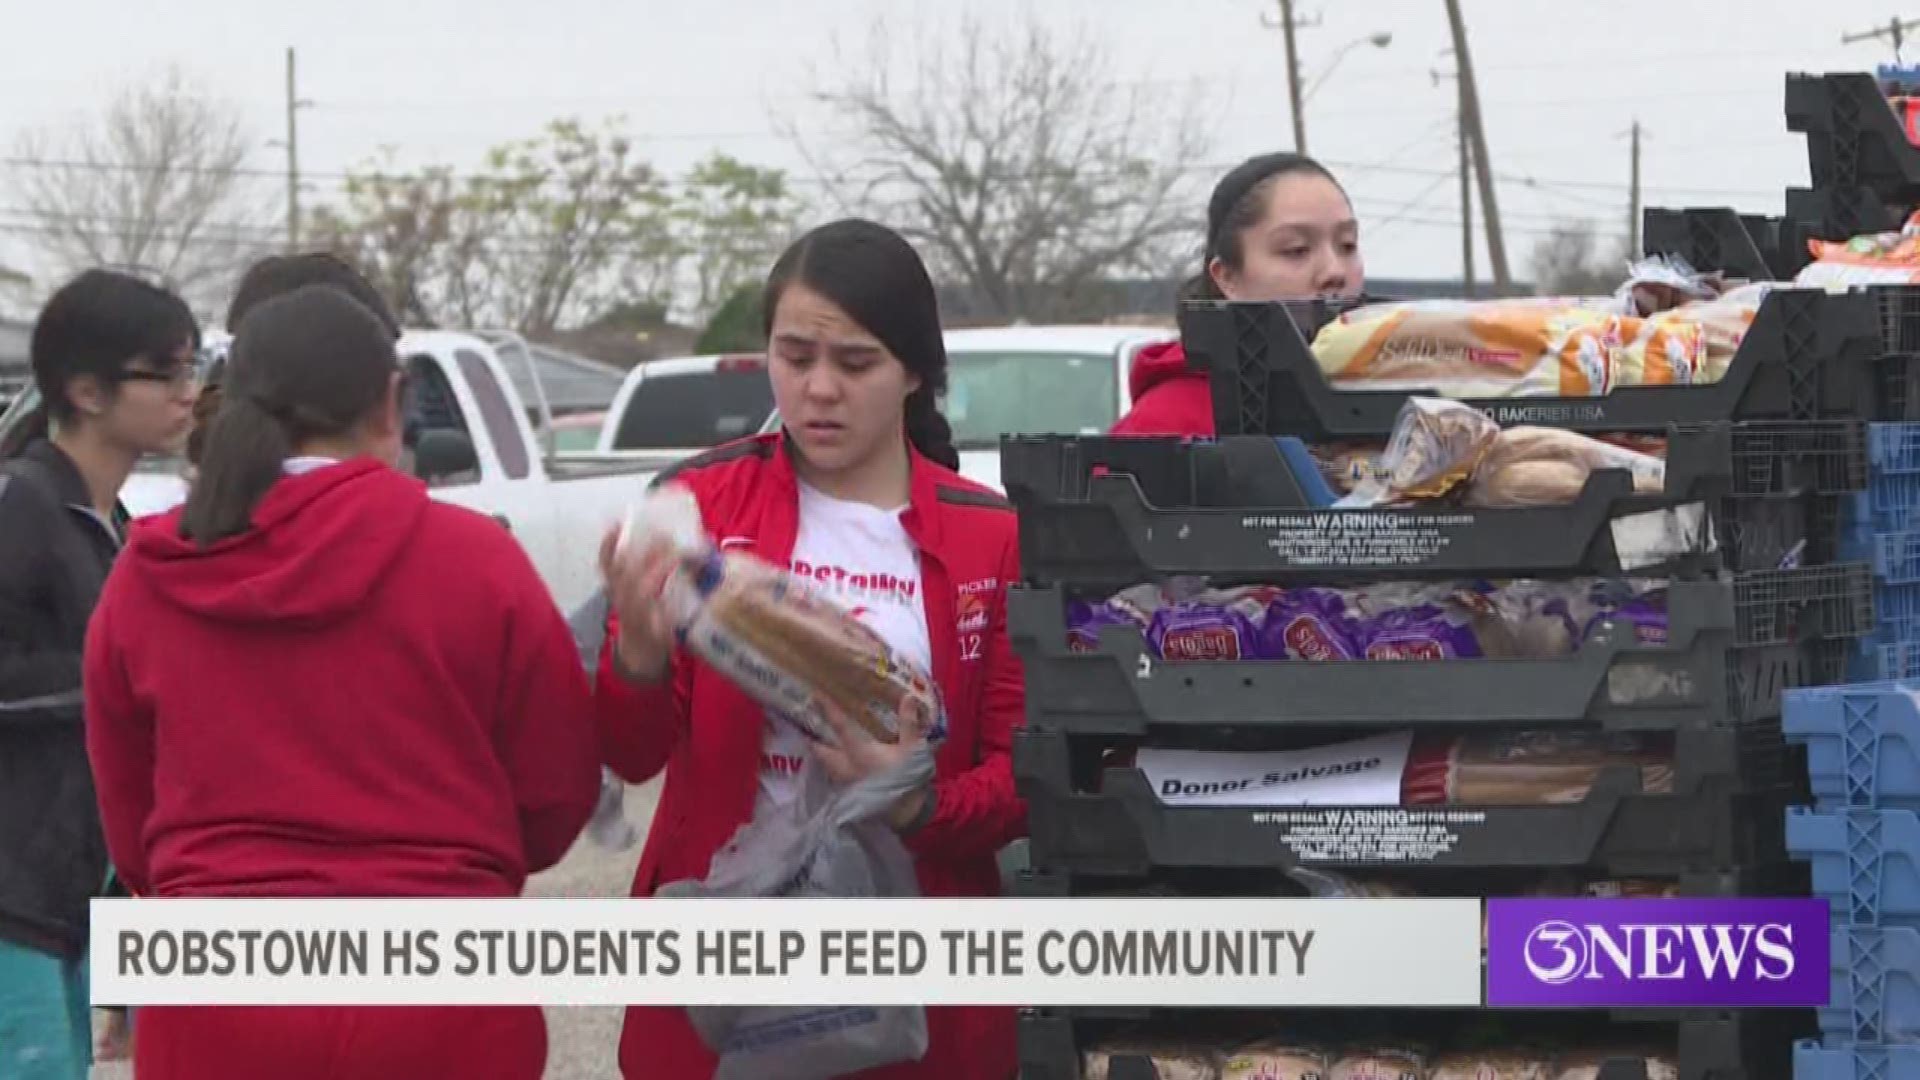 The scene today outside the Cotton Picker Stadium was lively, as students from various student organizations were there to hand out food to anyone in need.